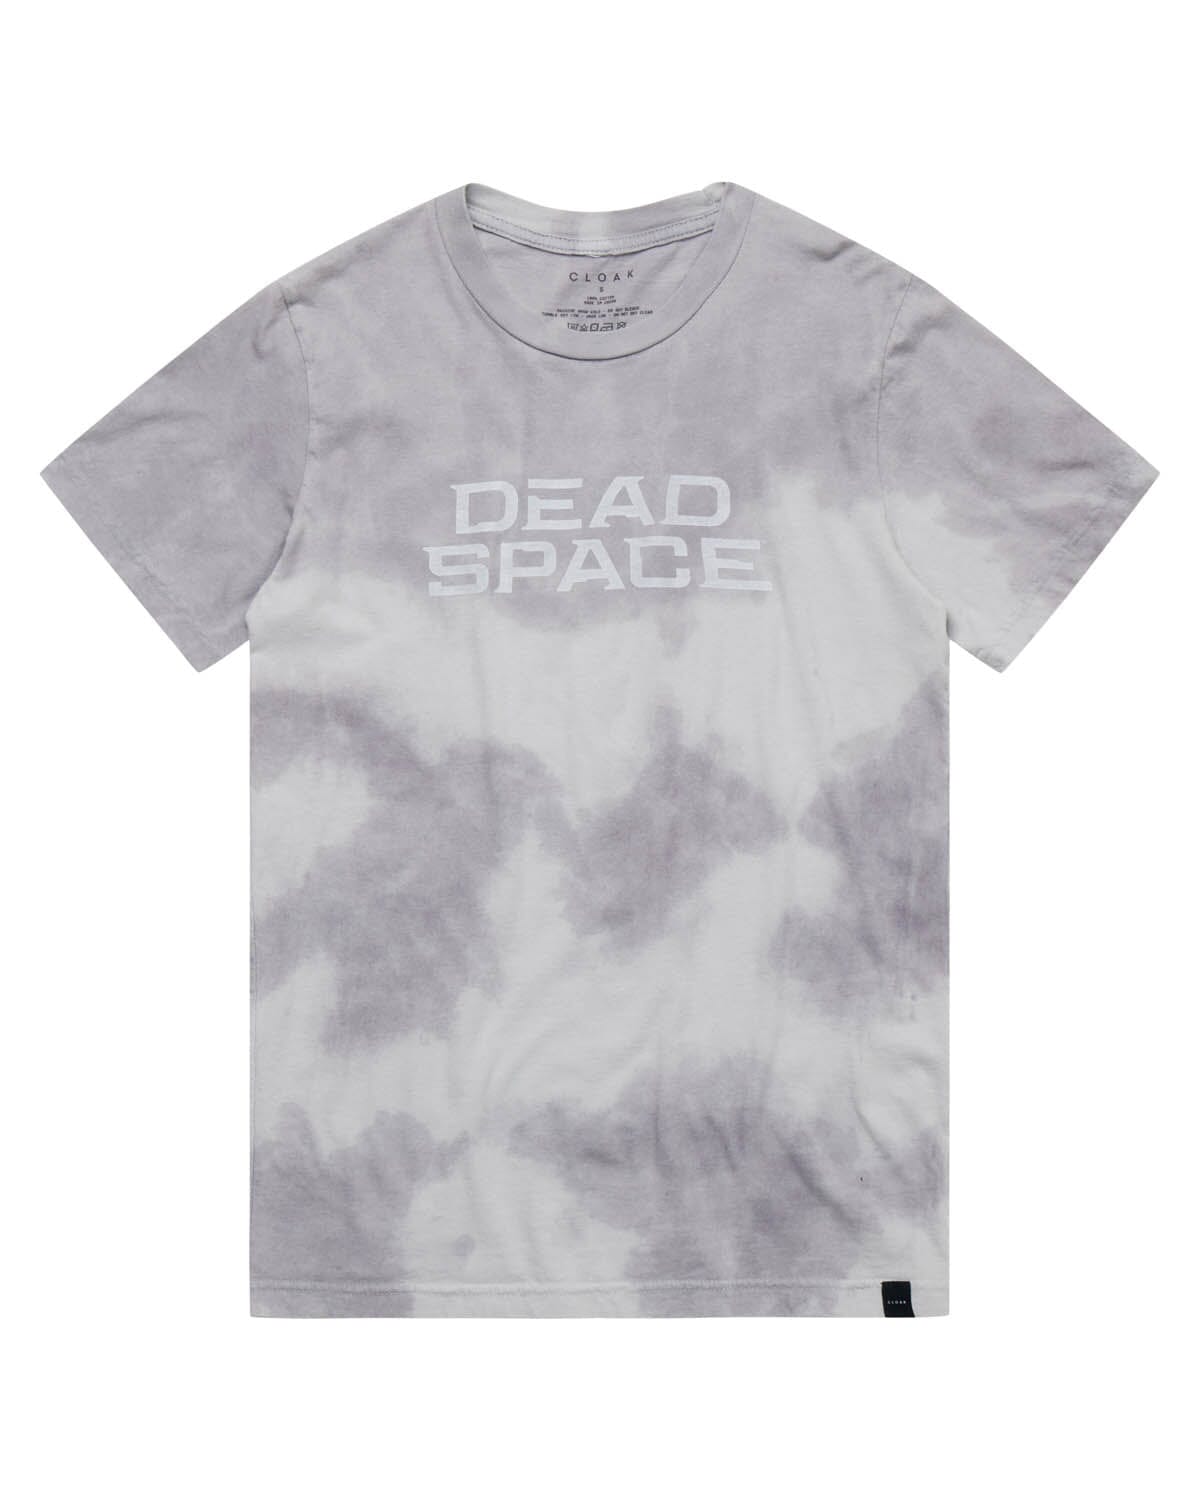 DS LOW HEALTH S/S TEE CONRETE TEE DEADSPACE2 